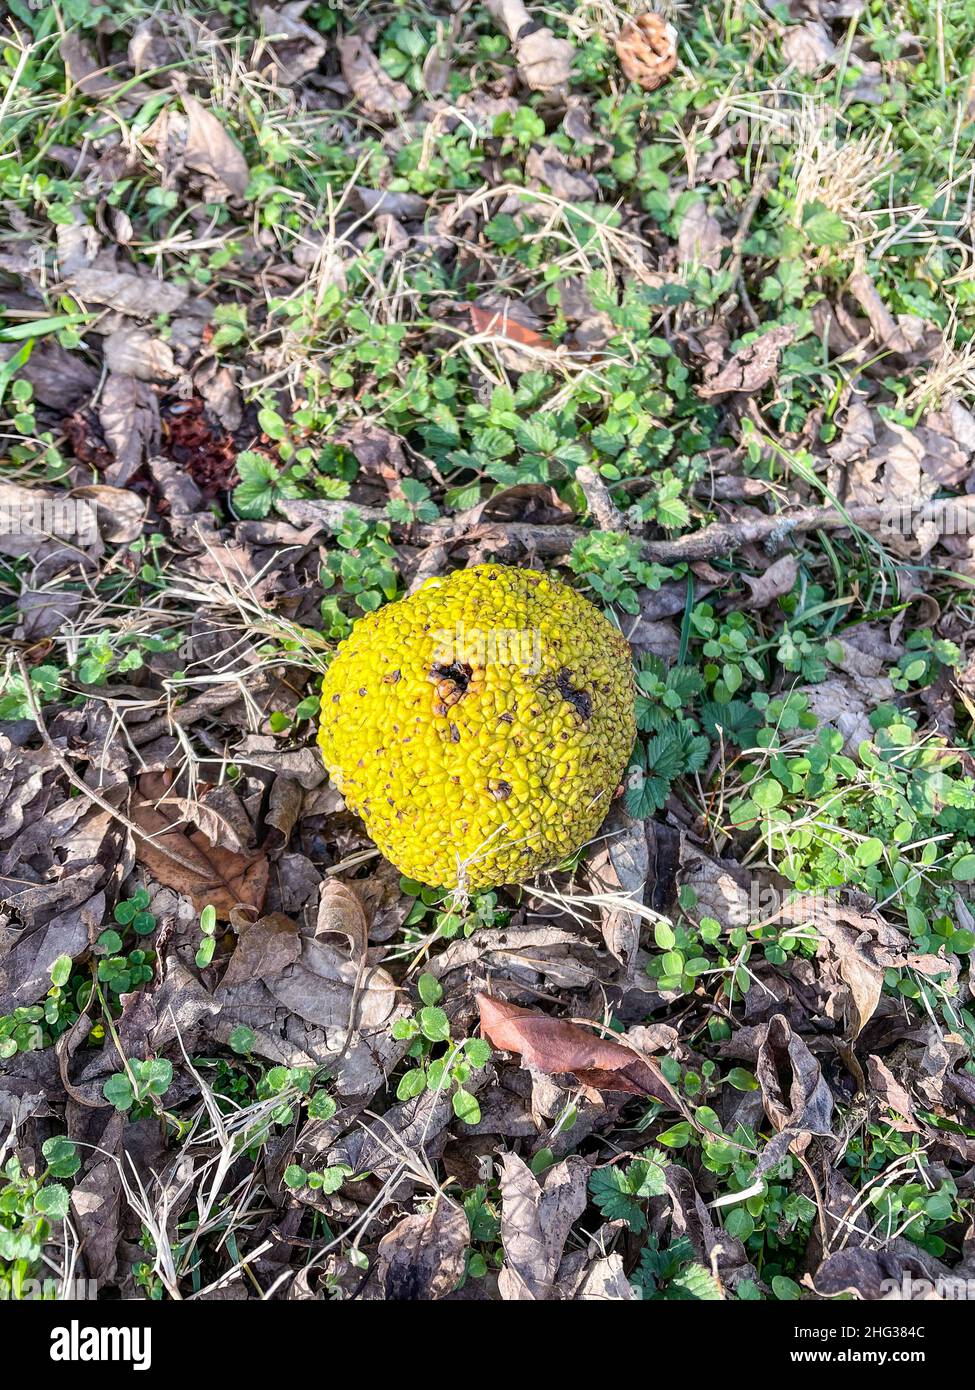 Osage orange (Maclura pomifera) is a small deciduous tree or large shrub, typically growing about 8 to 15 metres (30–50 ft) tall. The distinctive frui Stock Photo